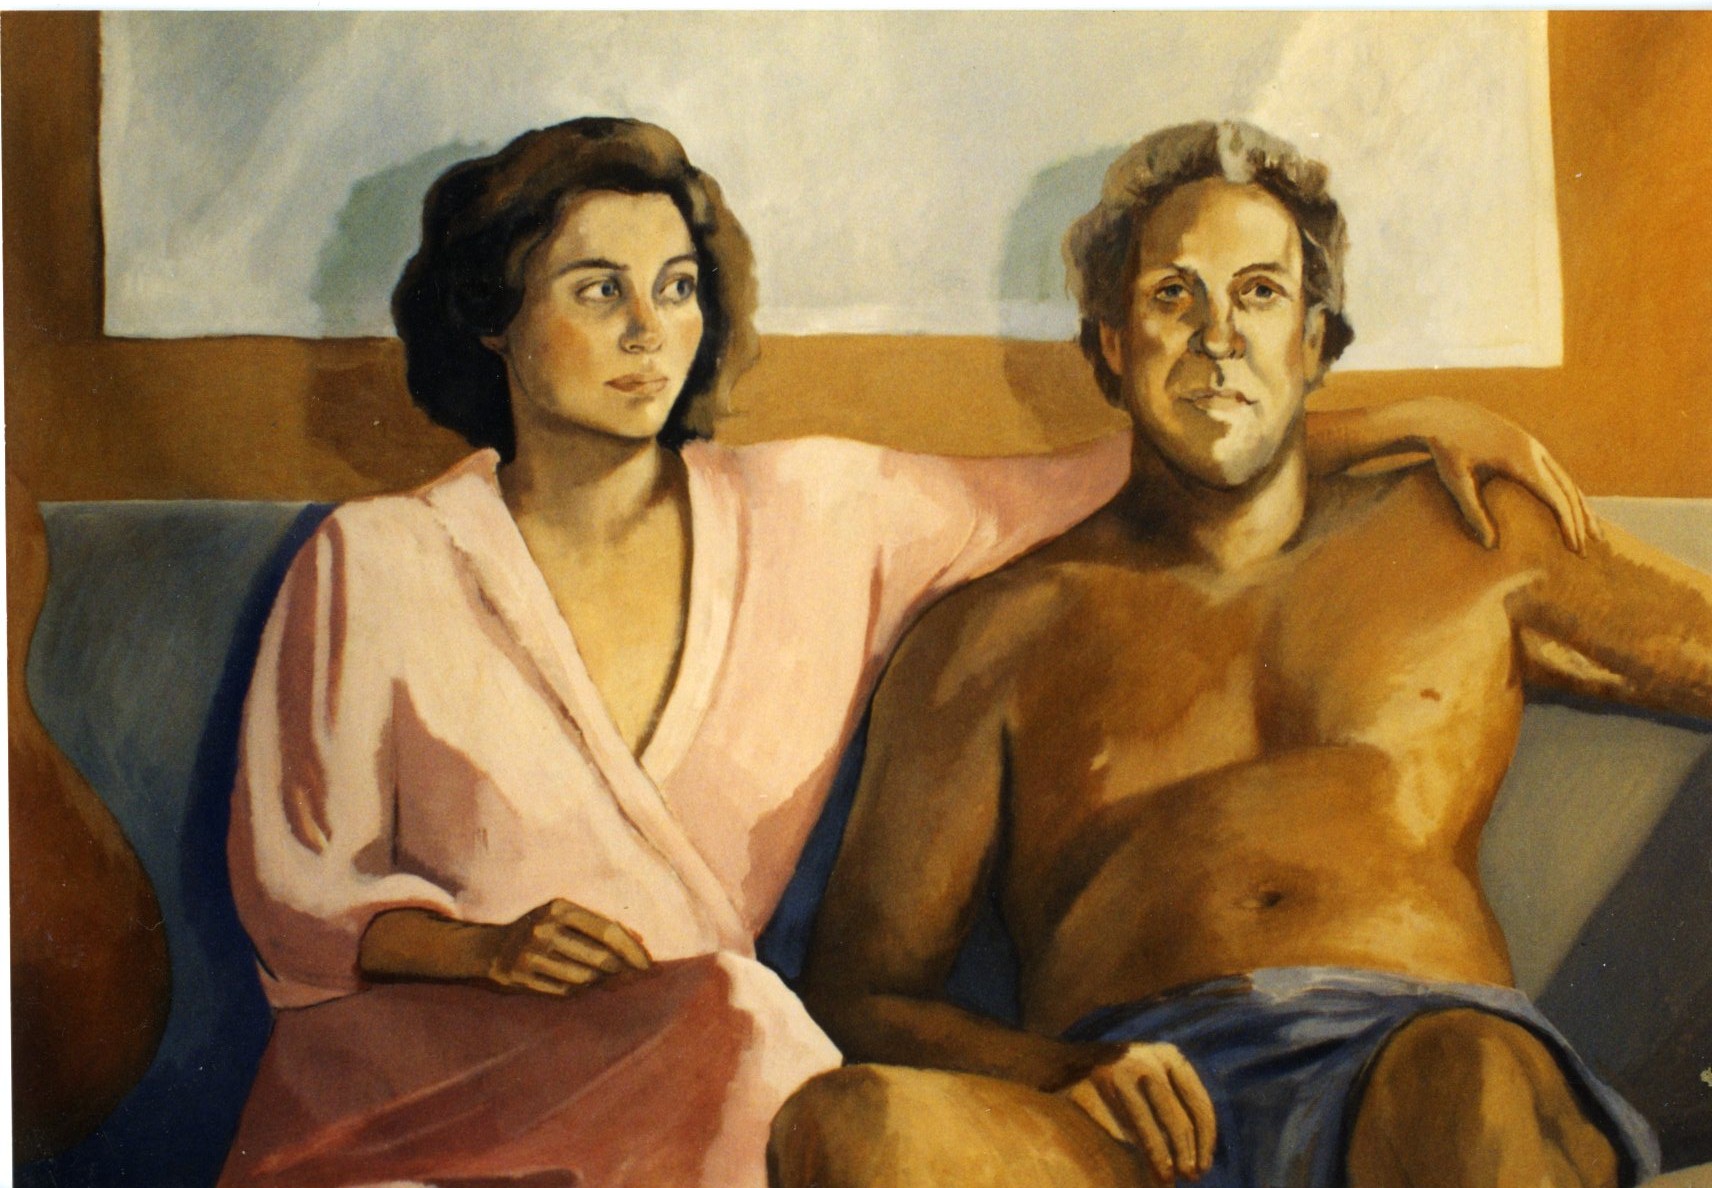 Searching for Oller, work-in-progress Lulu and David portrait, luquillo by Lulu Wilson